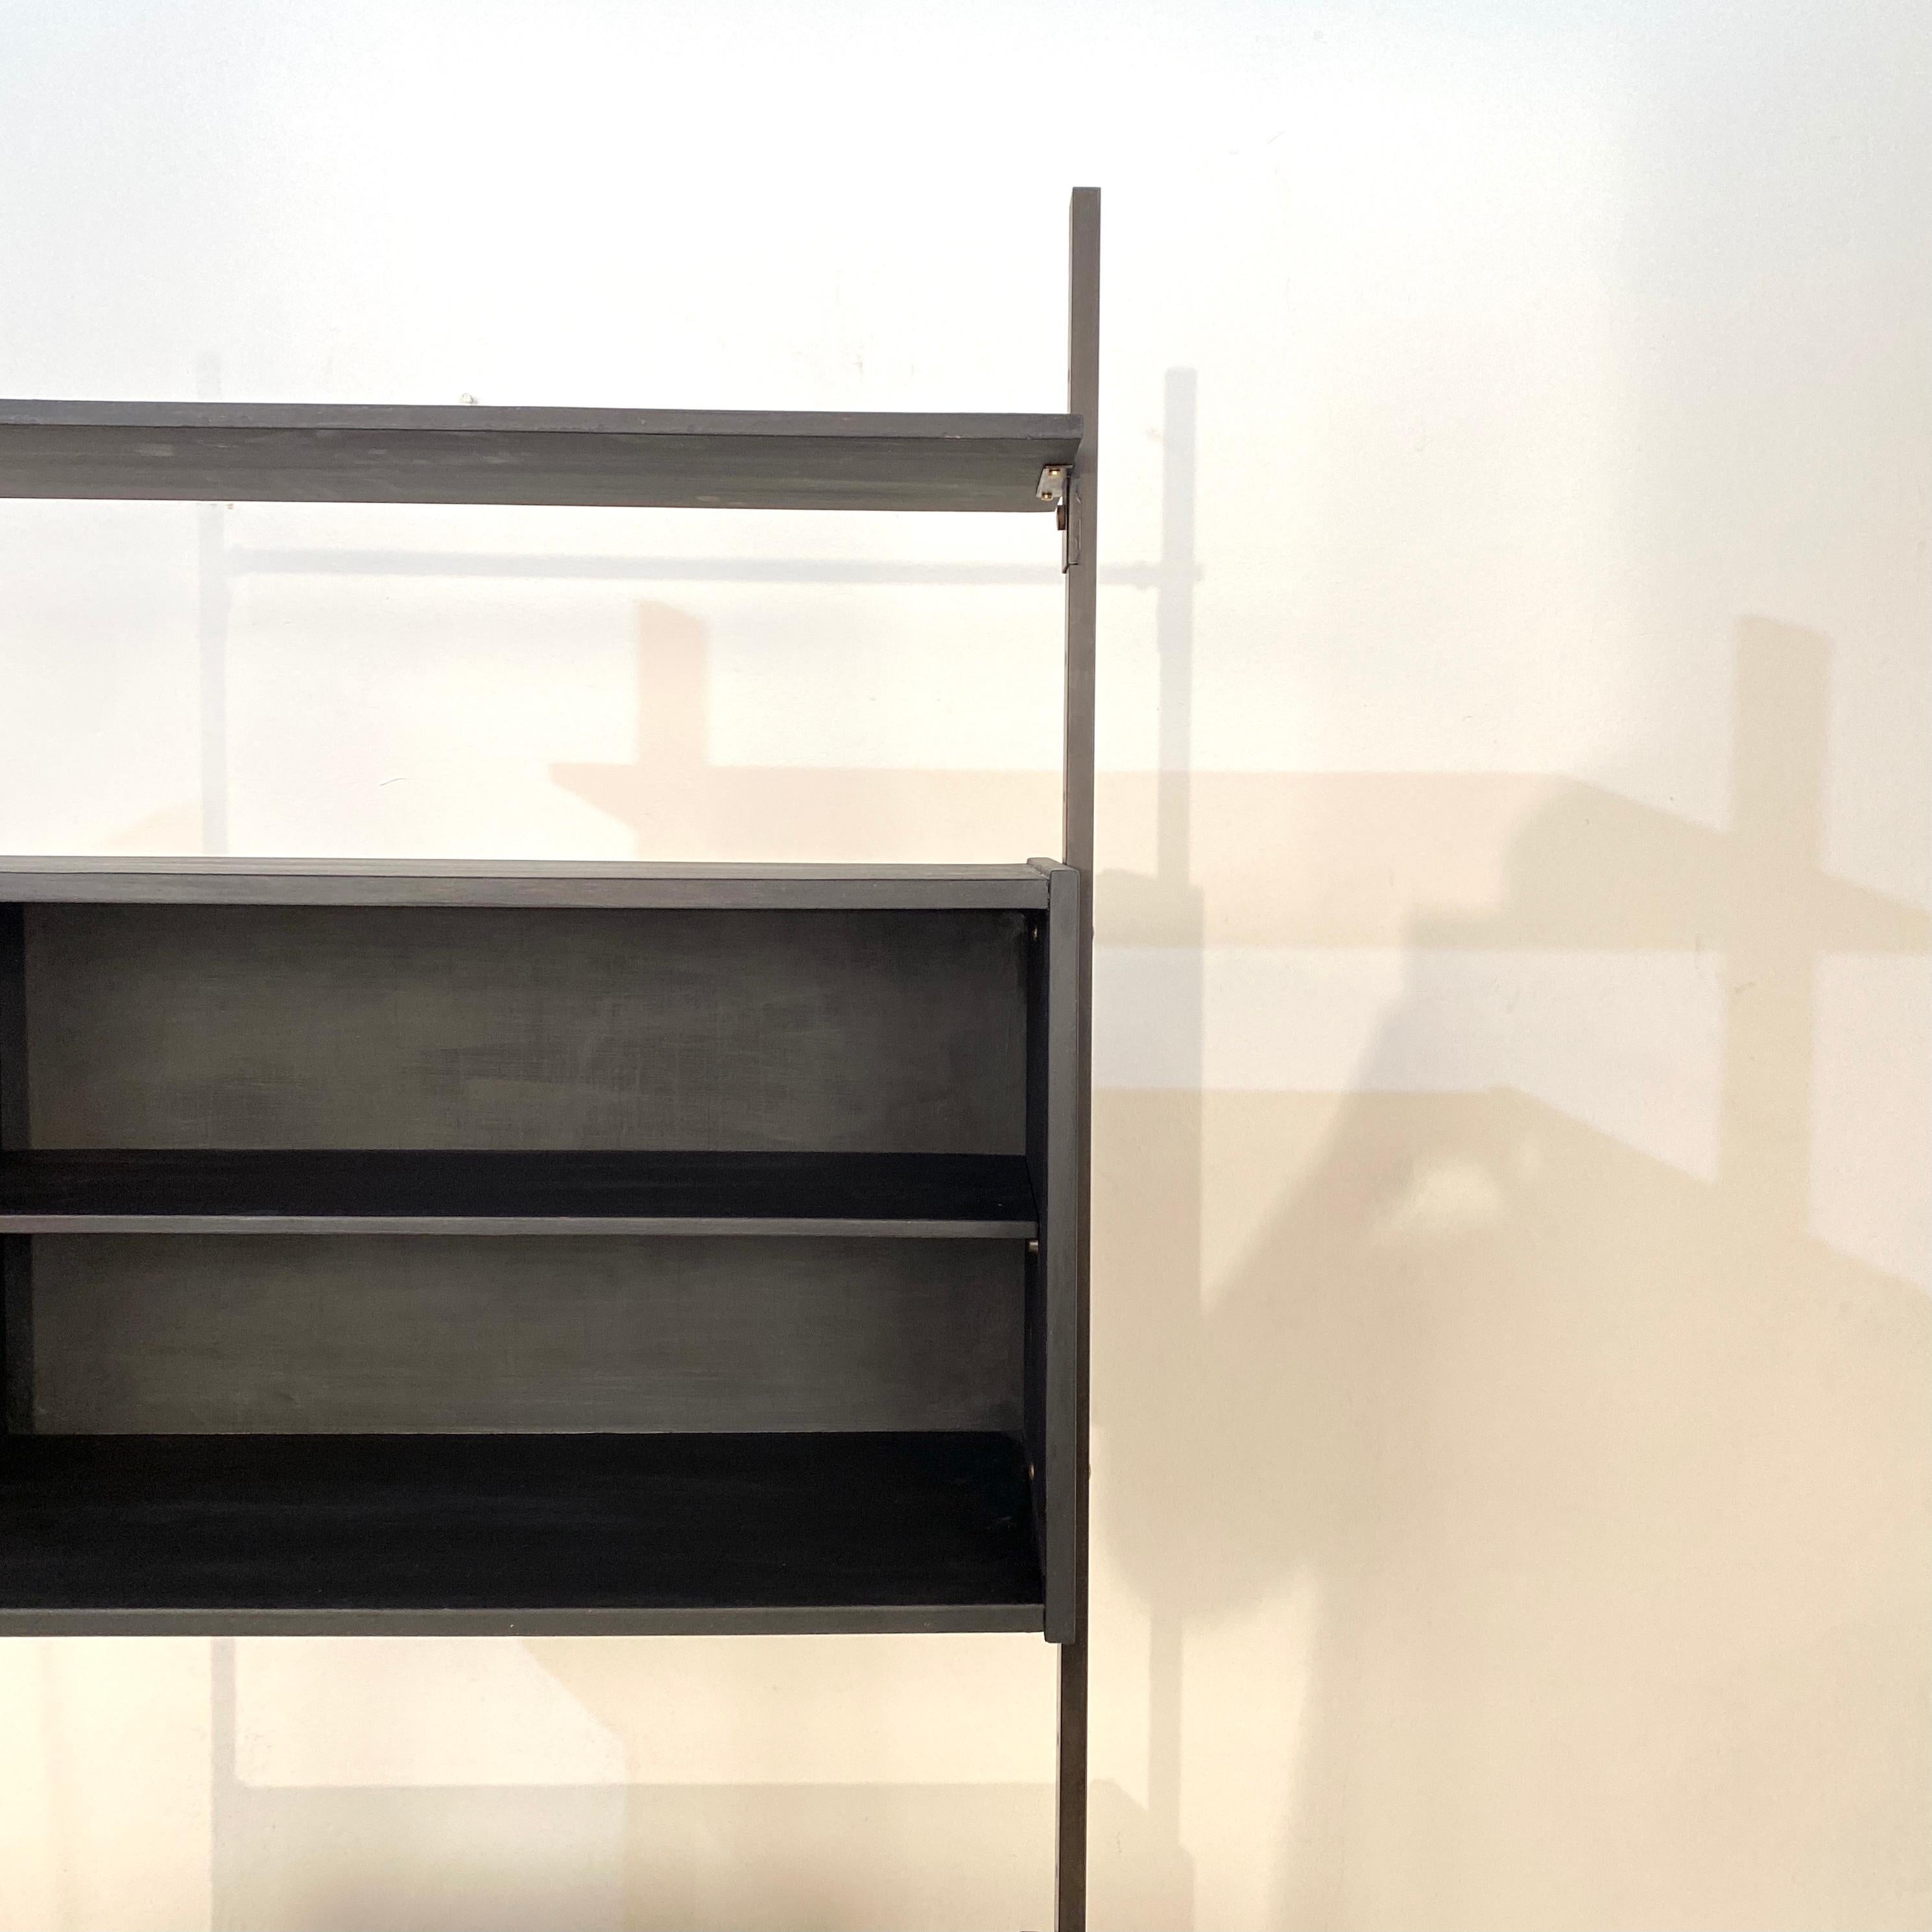 This elegant midcentury Italian shelf by BR Italian was made circa 1960.
It has black lacquered metal legs of frame and wood shelfing. It has got one open corpus and one corpus with 2 doors. There is also one single shelf board. 

A unique piece